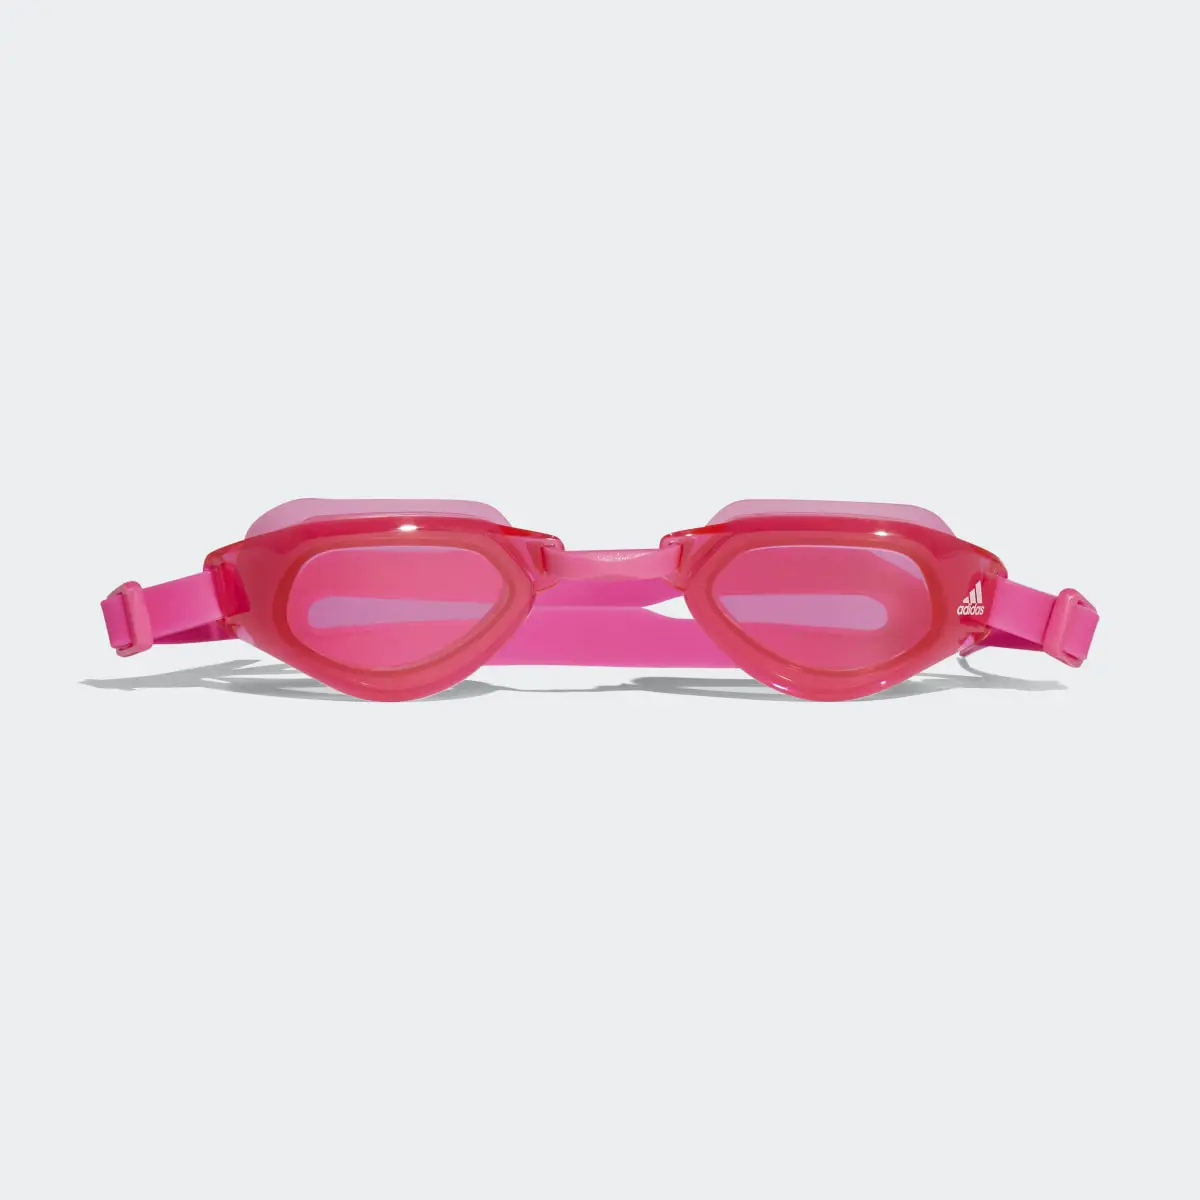 Adidas Persistar Fit Unmirrored Schwimmbrille. 3